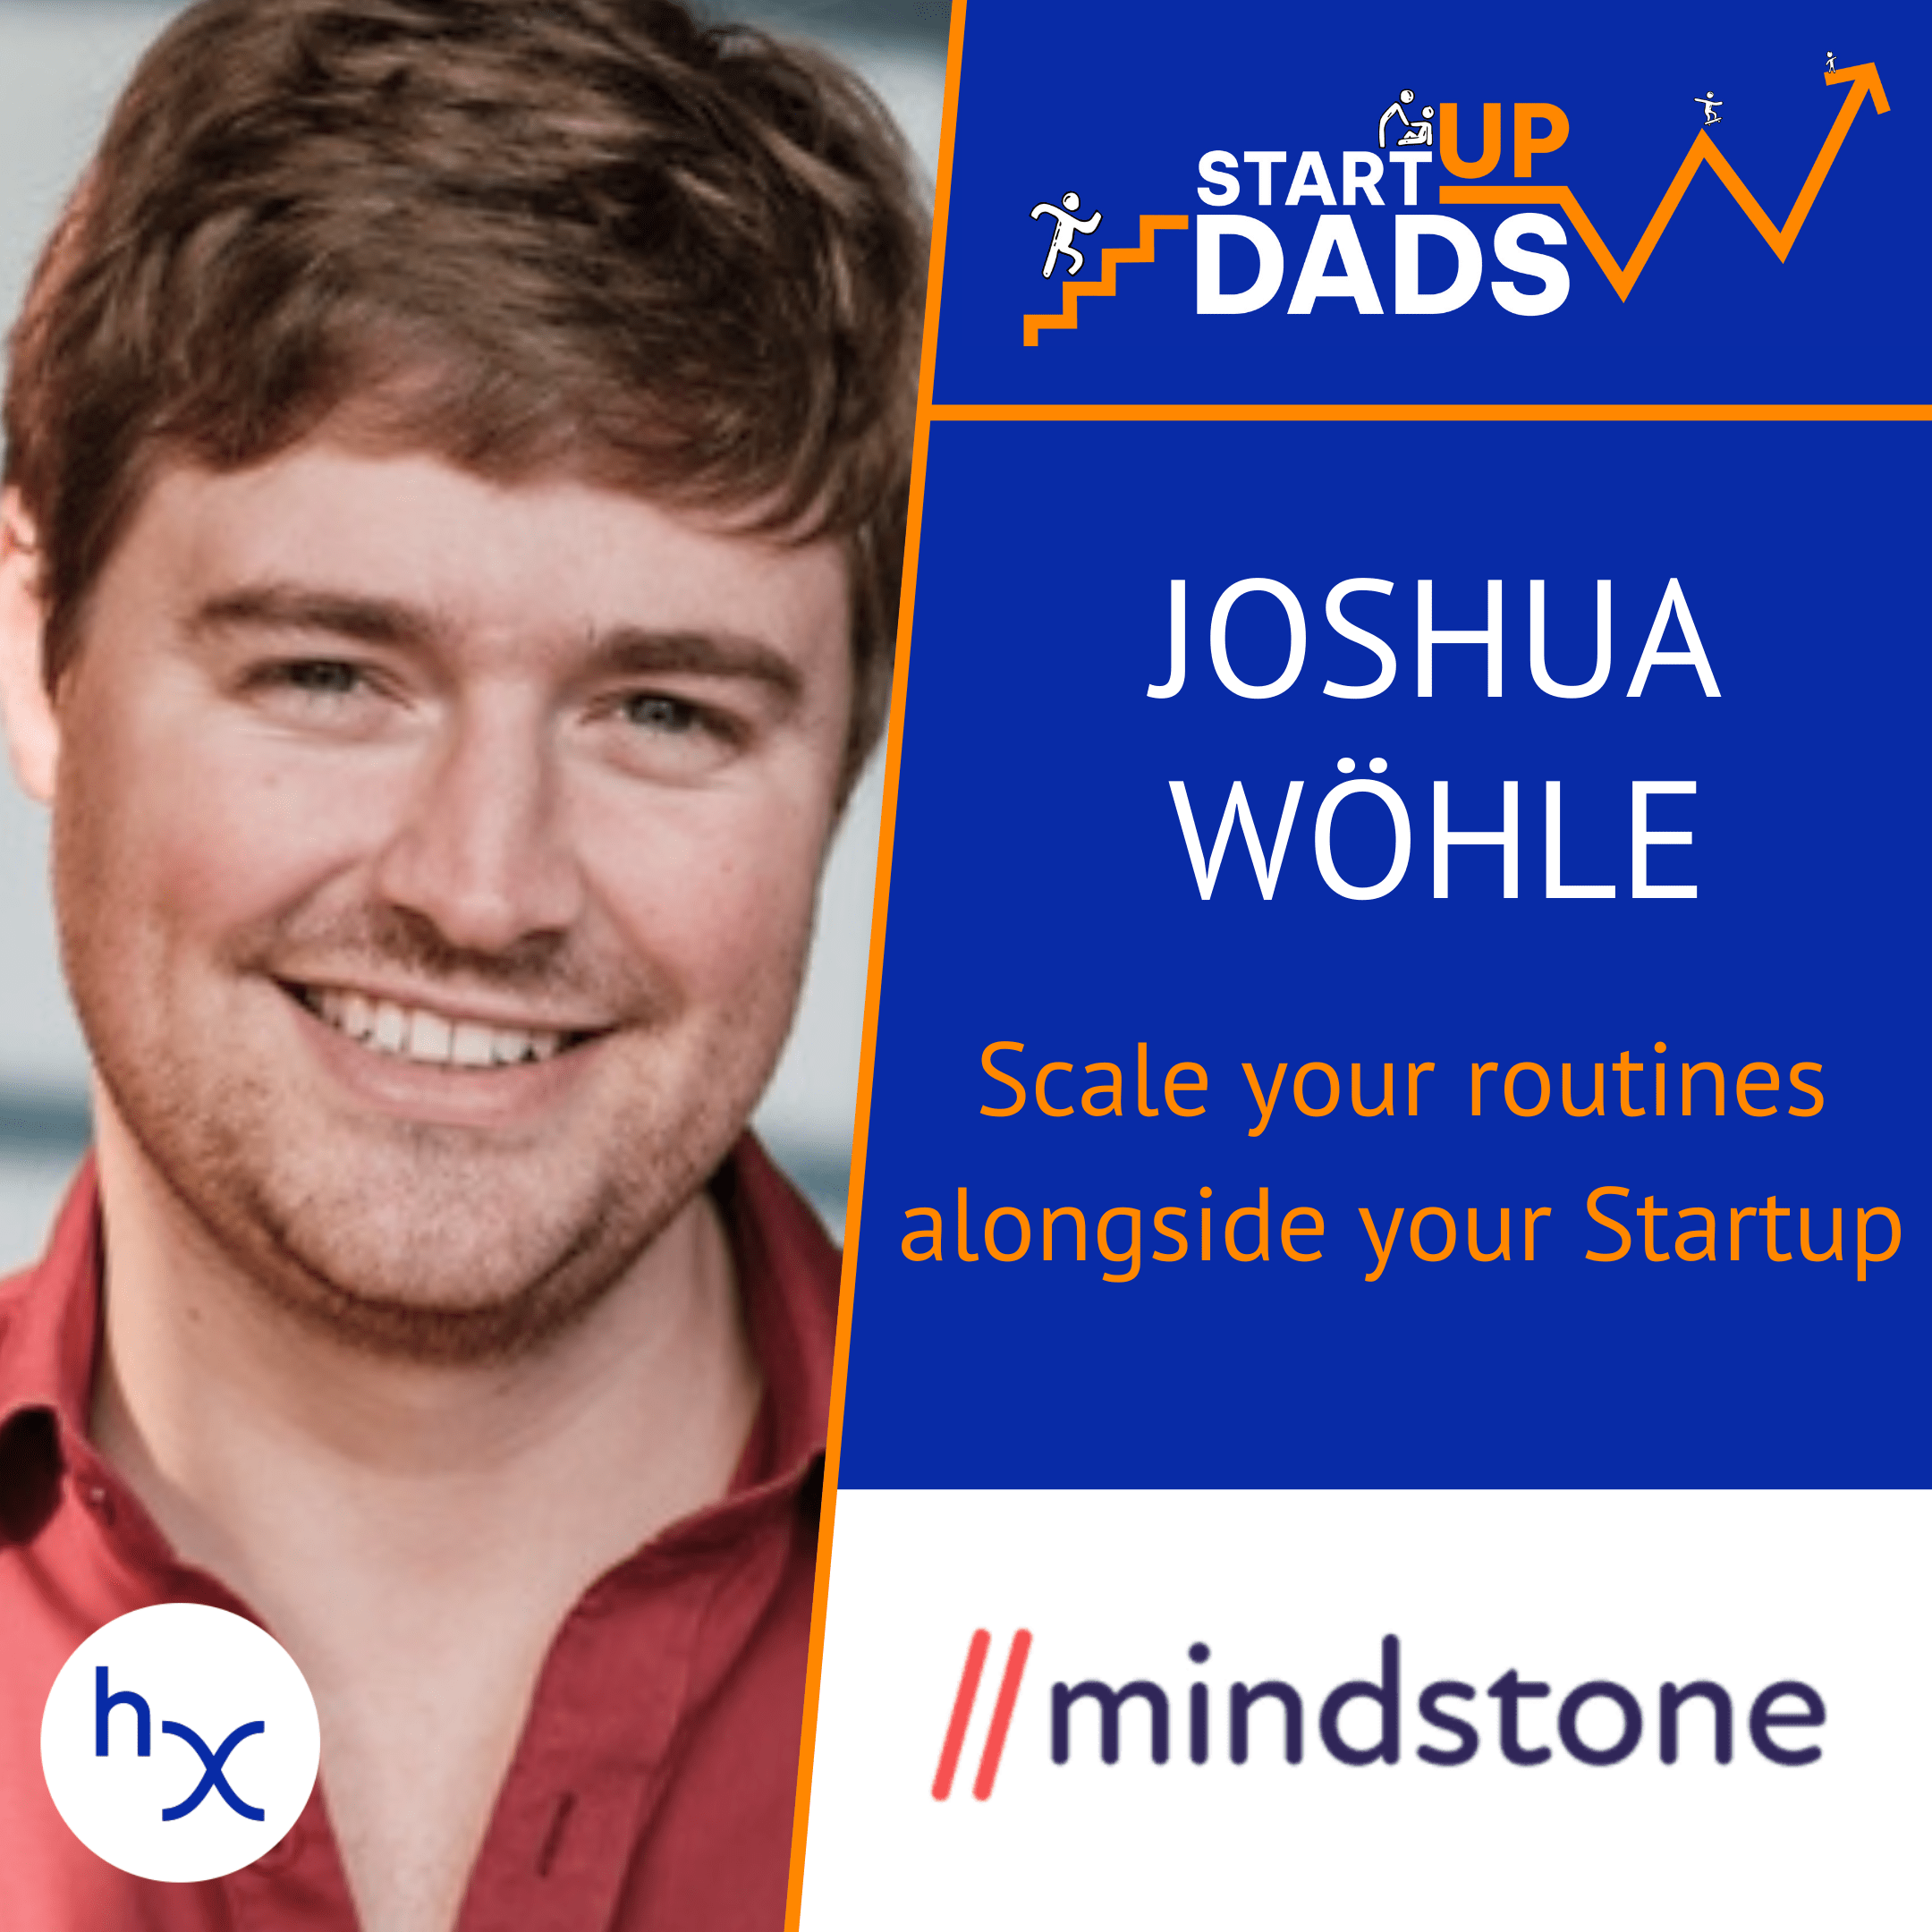 Scale your routines alongside your Startup, over communicate on expectations, & definitions of success for a founder with children: Joshua Wöhle, Mindstone